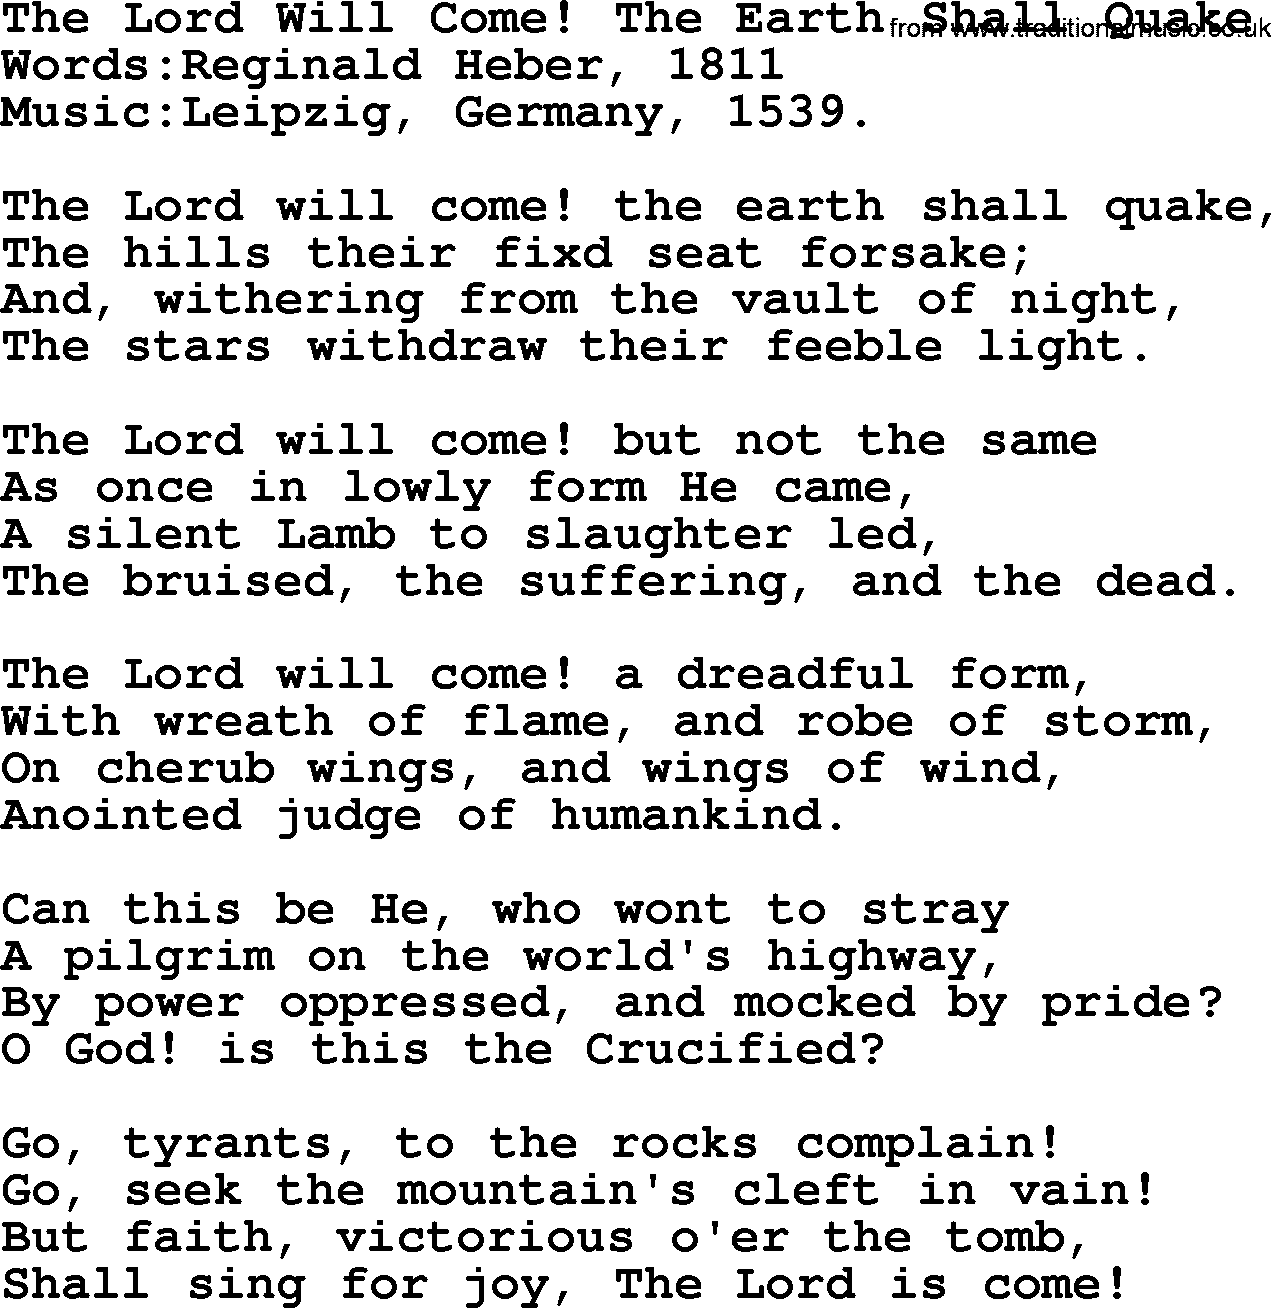 Christian hymns and songs about Jesus' Return(The Second Coming): The Lord Will Come! The Earth Shall Quake, lyrics with PDF